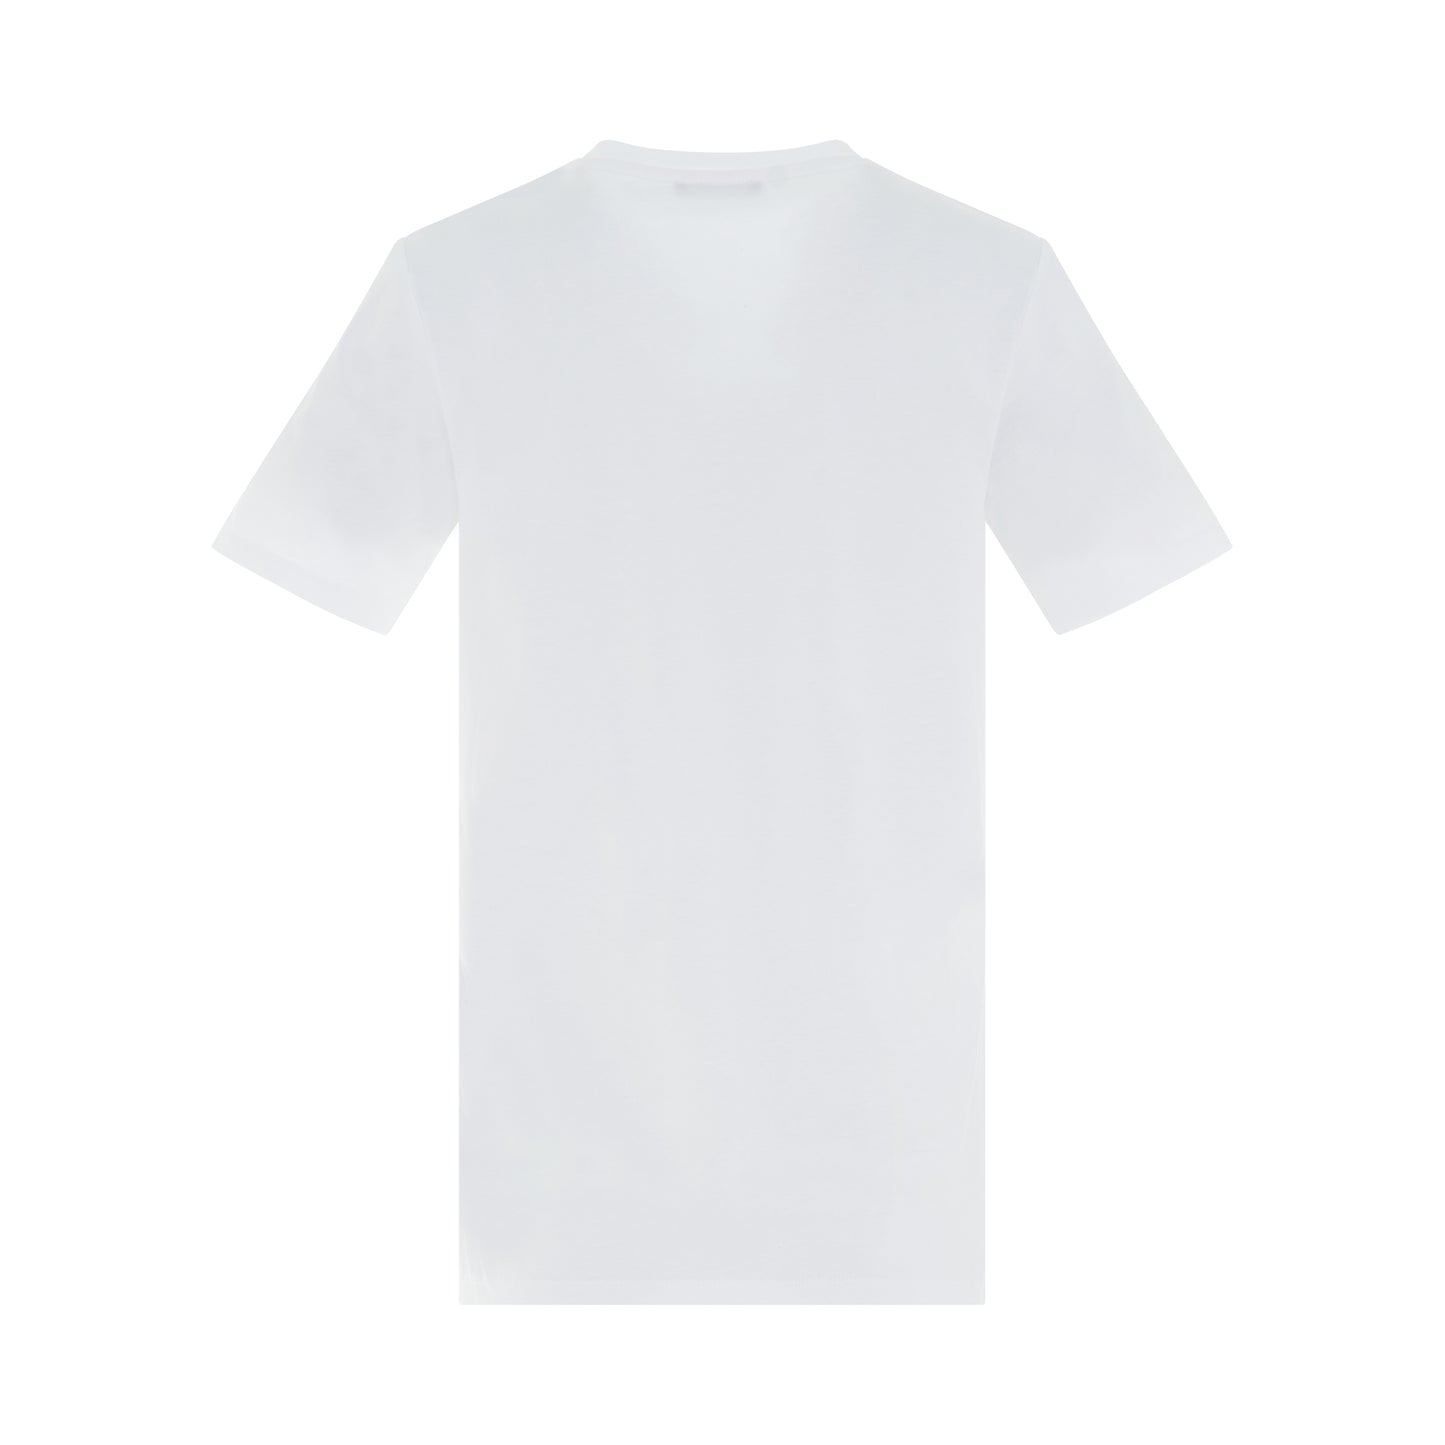 3 Button Printed Logo Classic Fit T-Shirt in White/Black